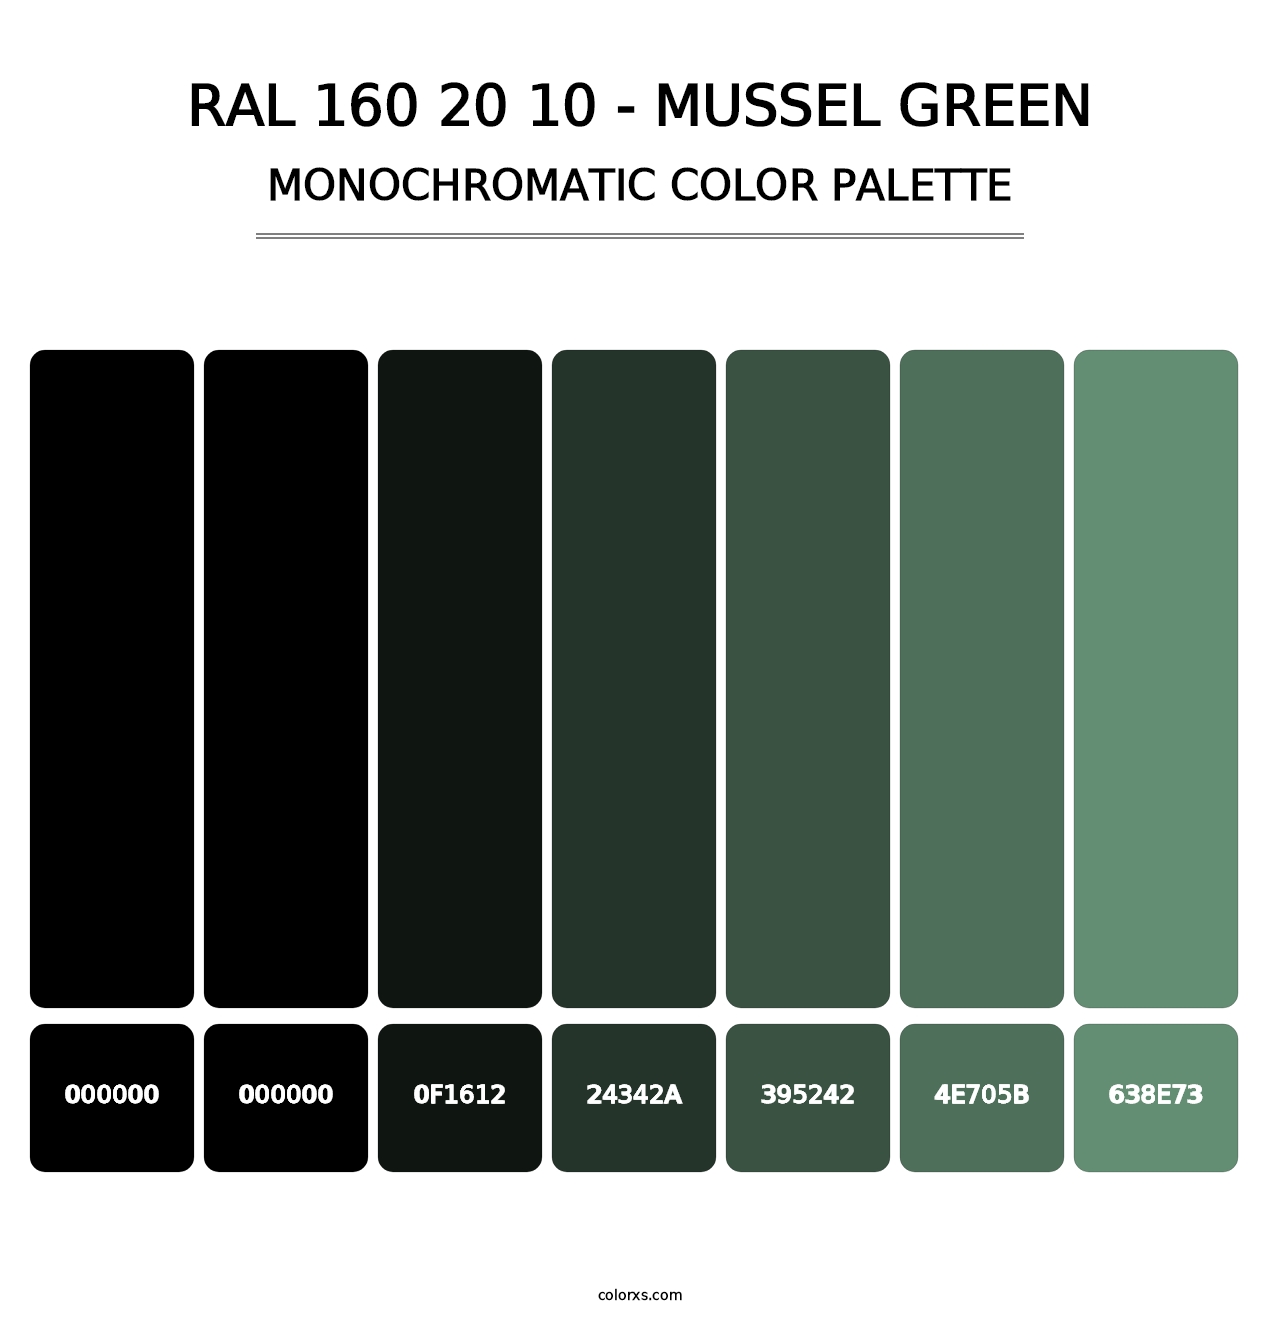 RAL 160 20 10 - Mussel Green - Monochromatic Color Palette